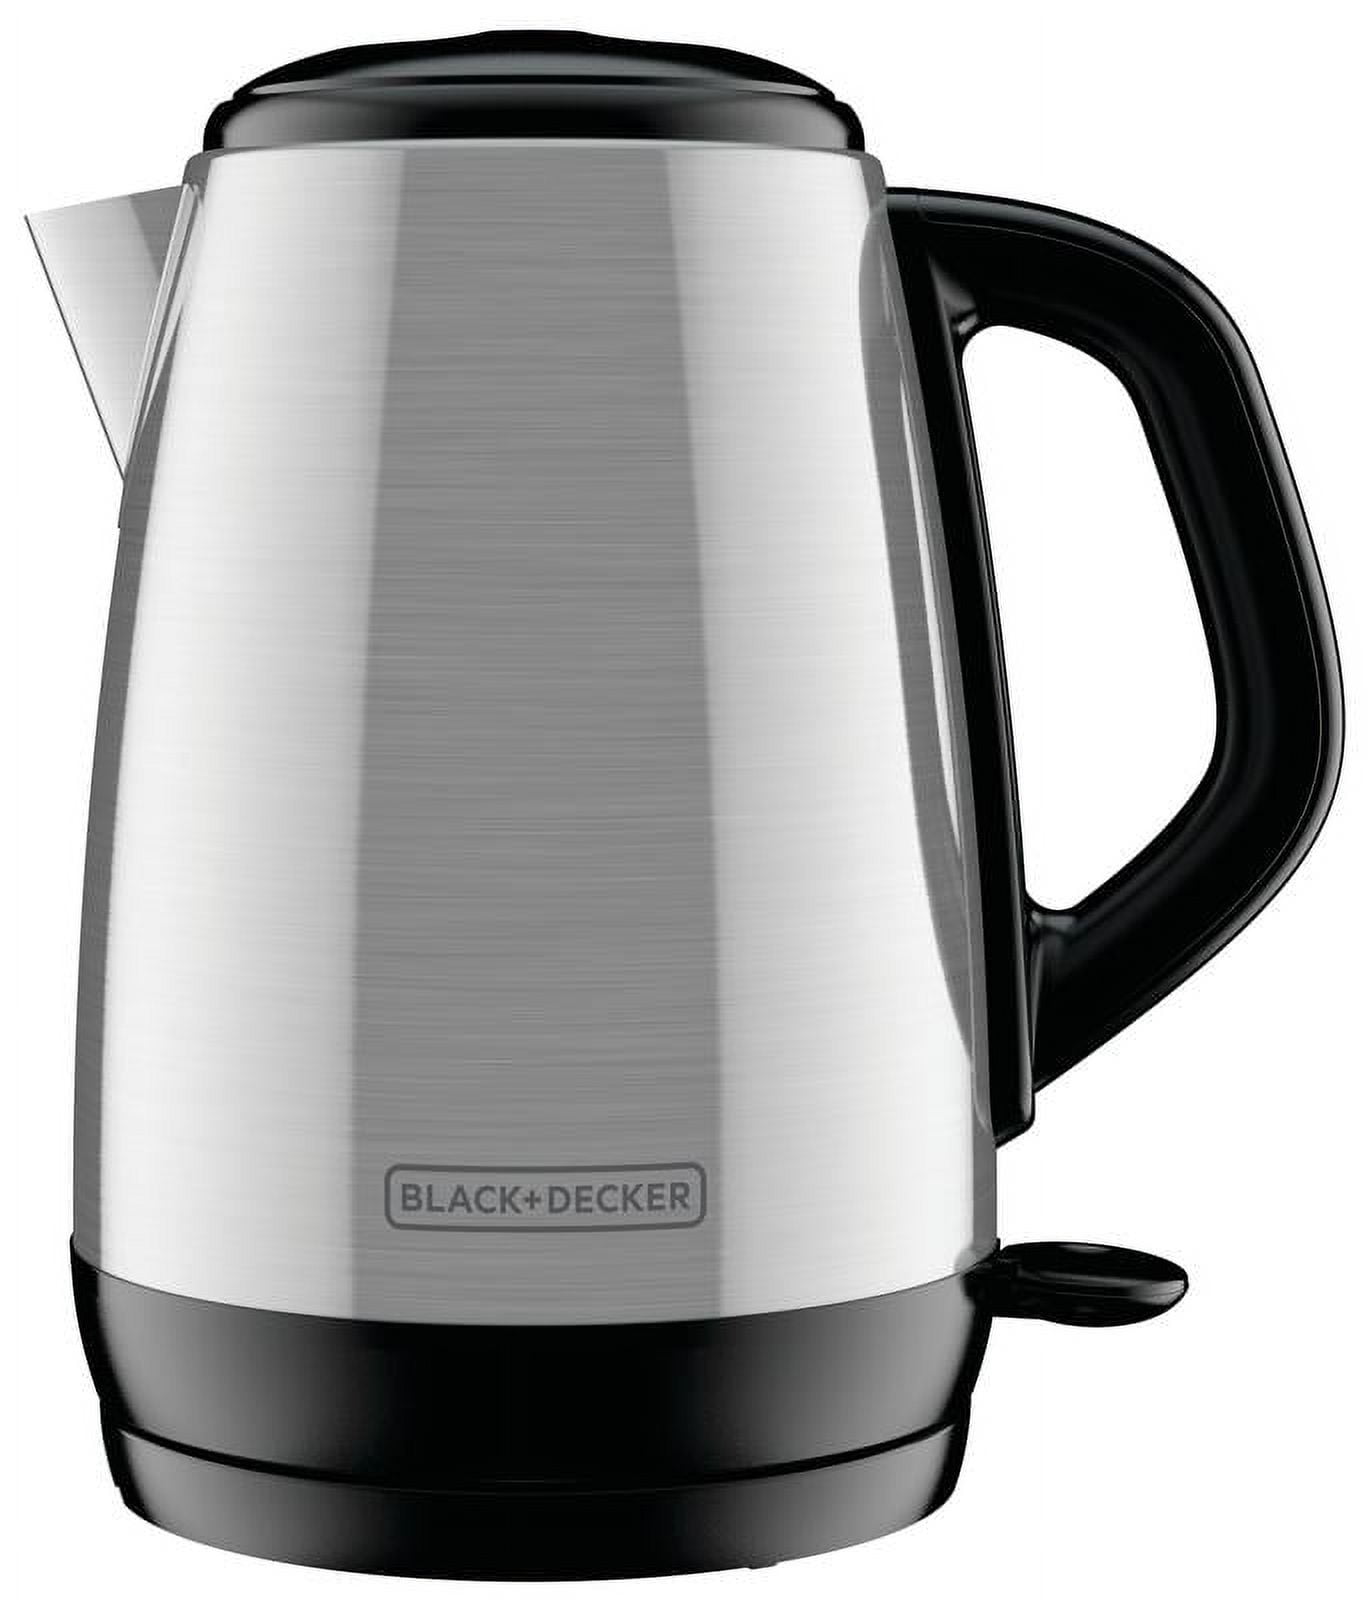 BLACK & DECKER STAINLESS STEEL ELECTRIC CORDLESS KETTLE RED  CK1500R/BRAND NEW